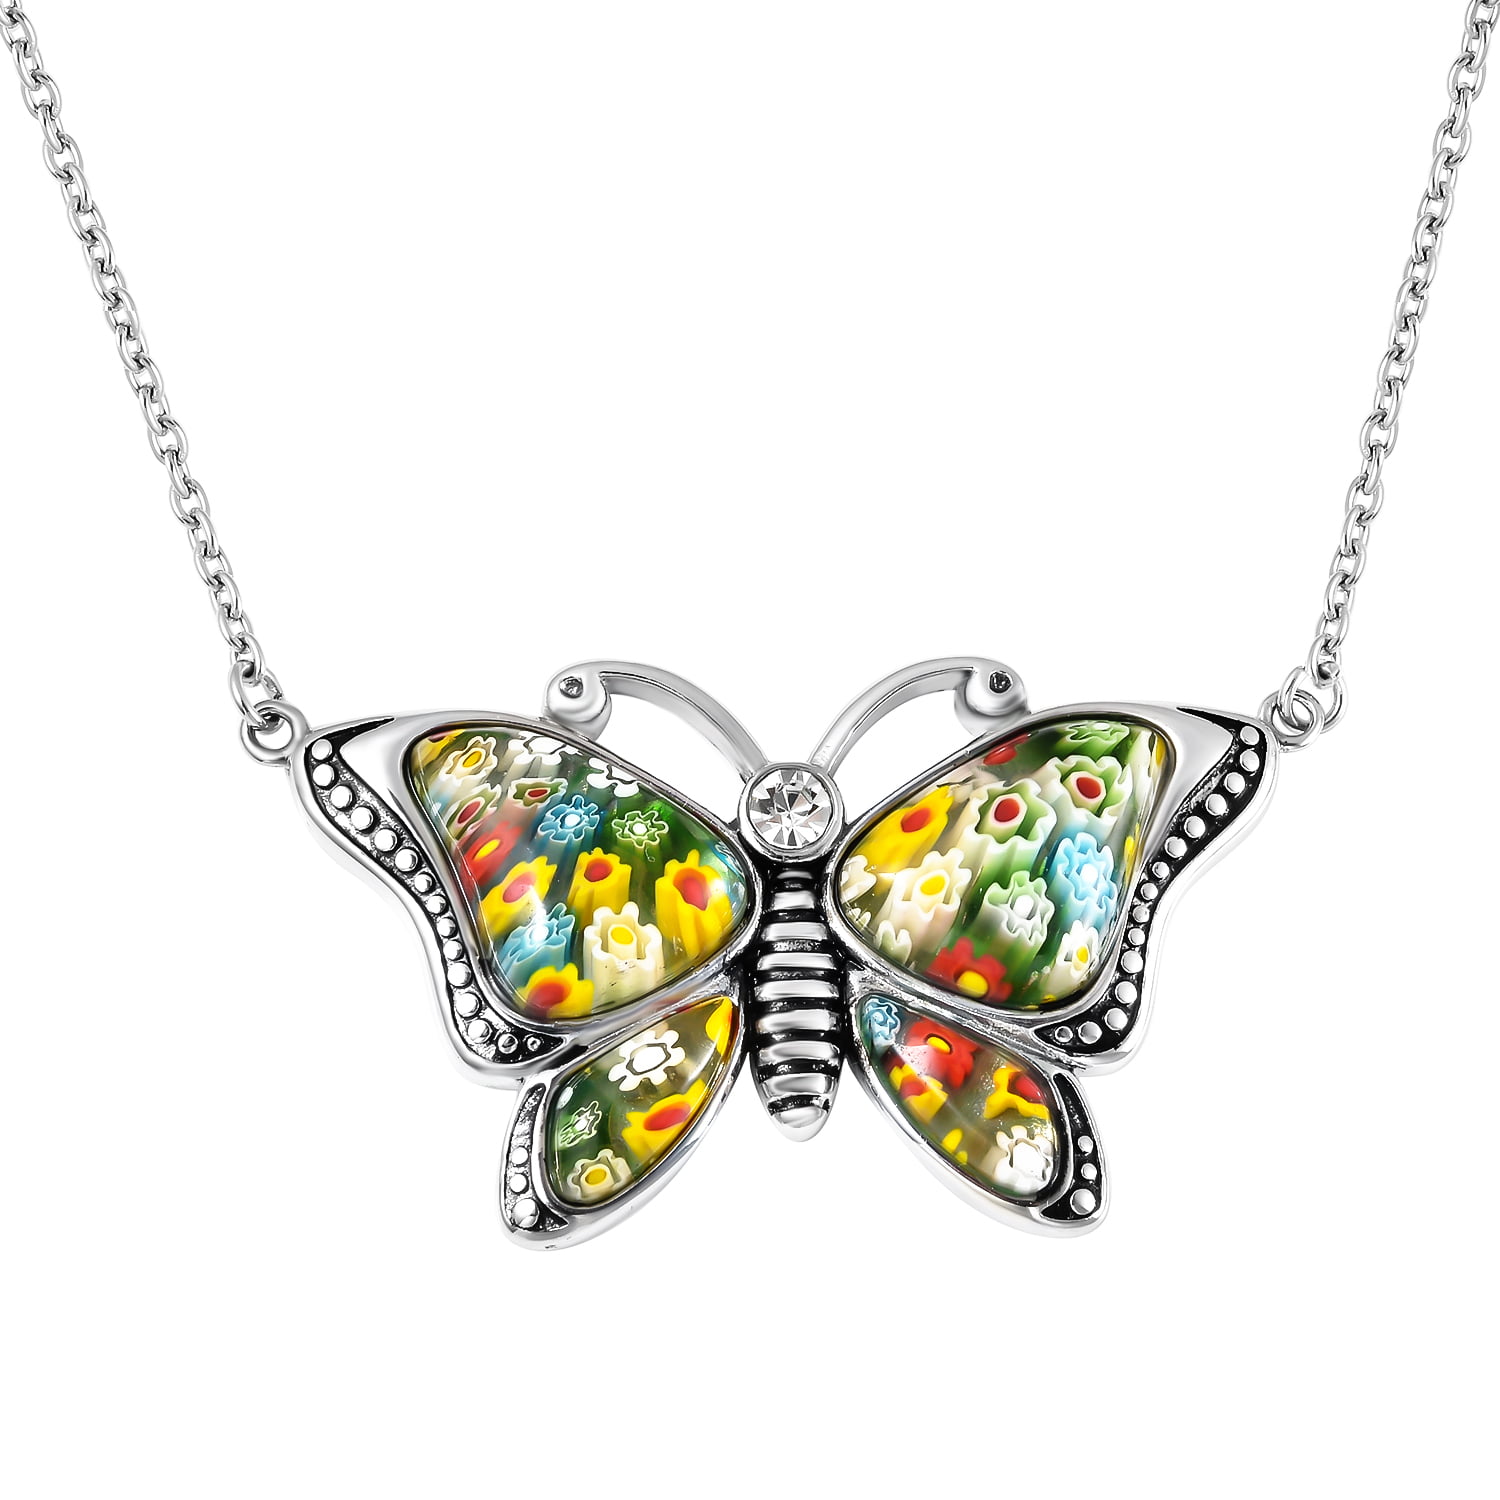 Fashion  Rhinestone Butterfly Pendent Necklace Sweater Chain RED PURPLE BLUE